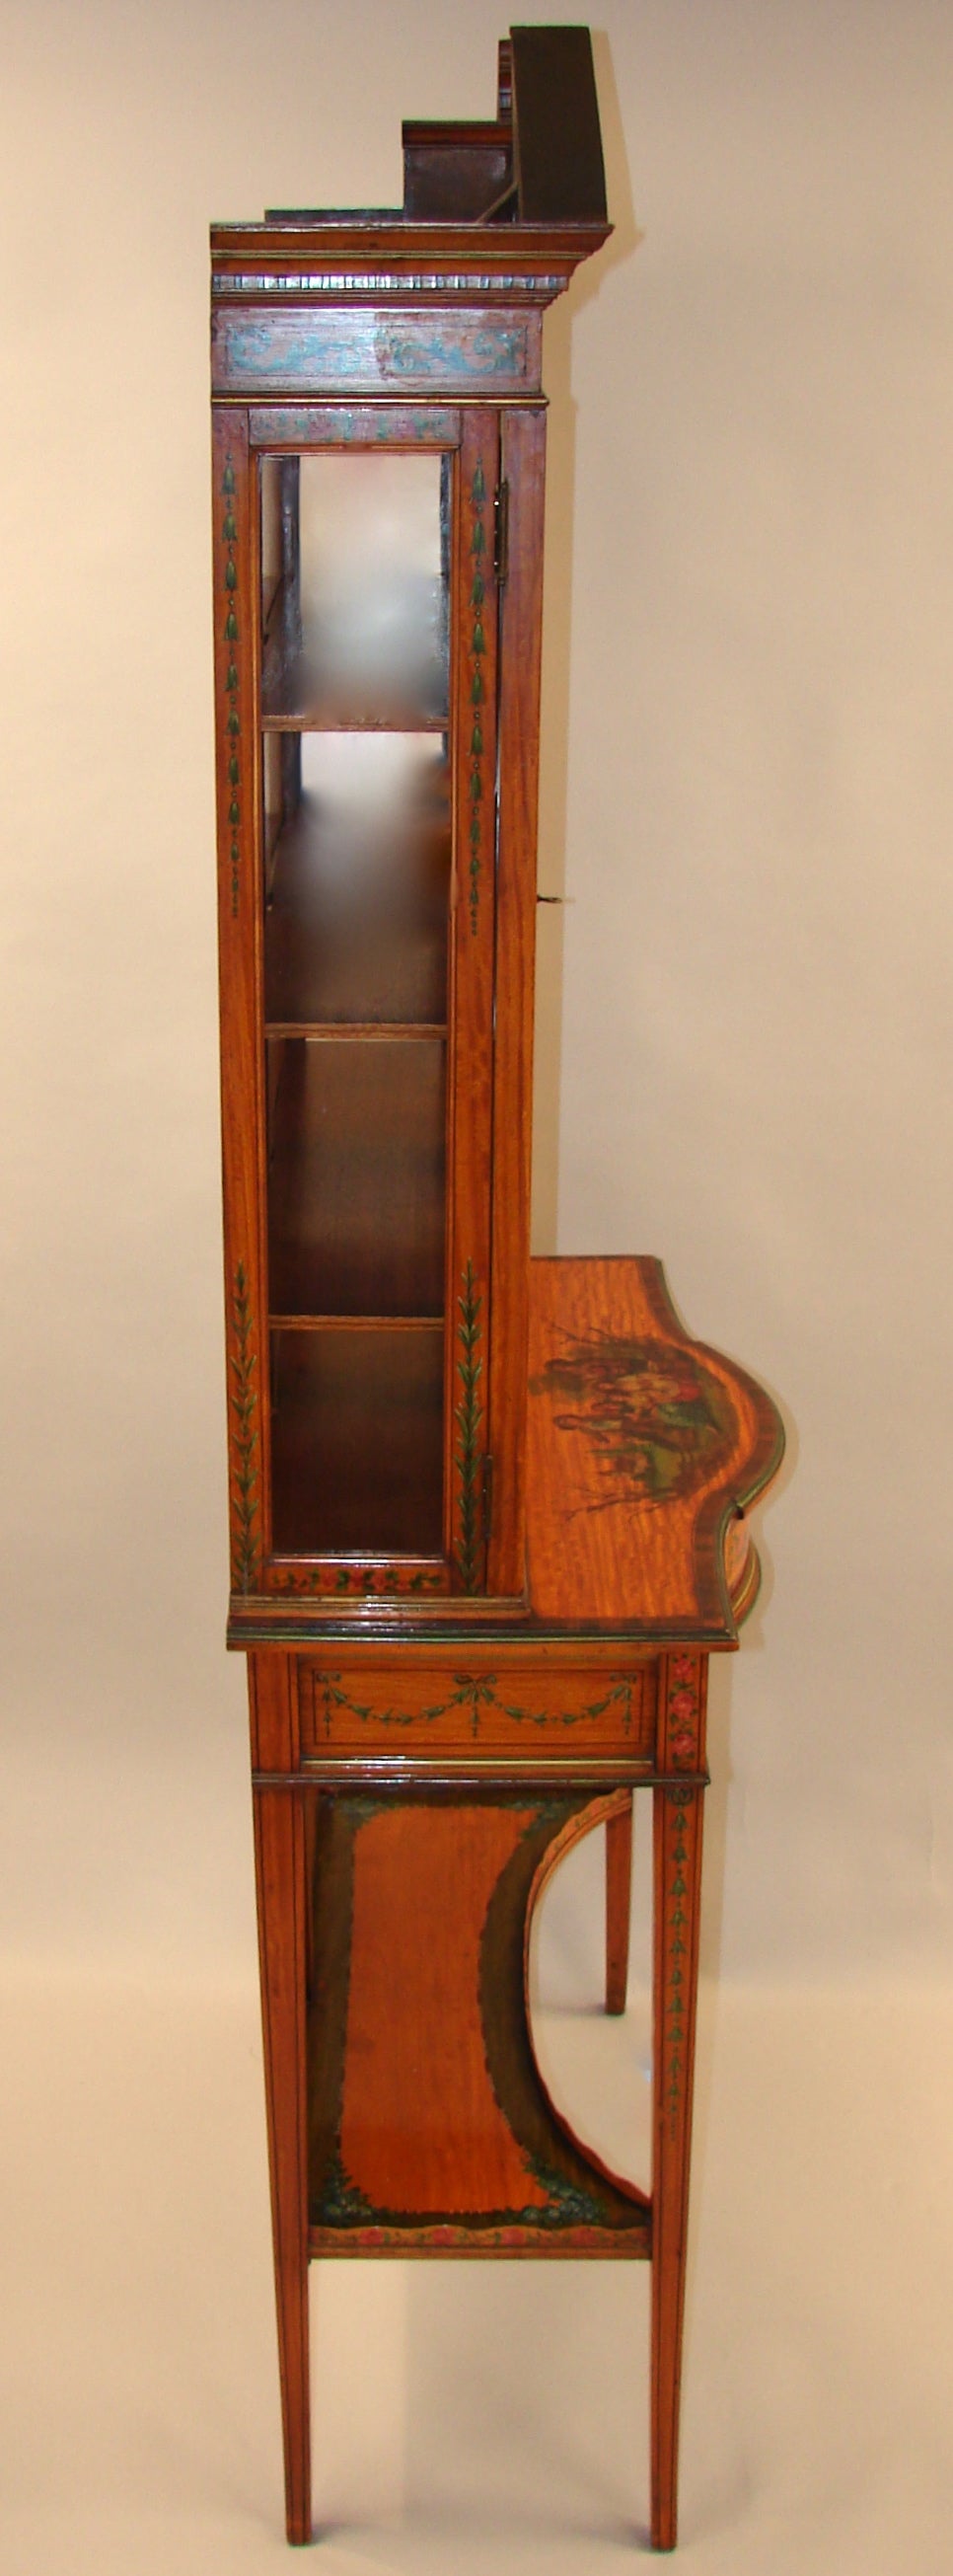 20th Century FIne Quality English Painted Satinwood Cabinet on Stand